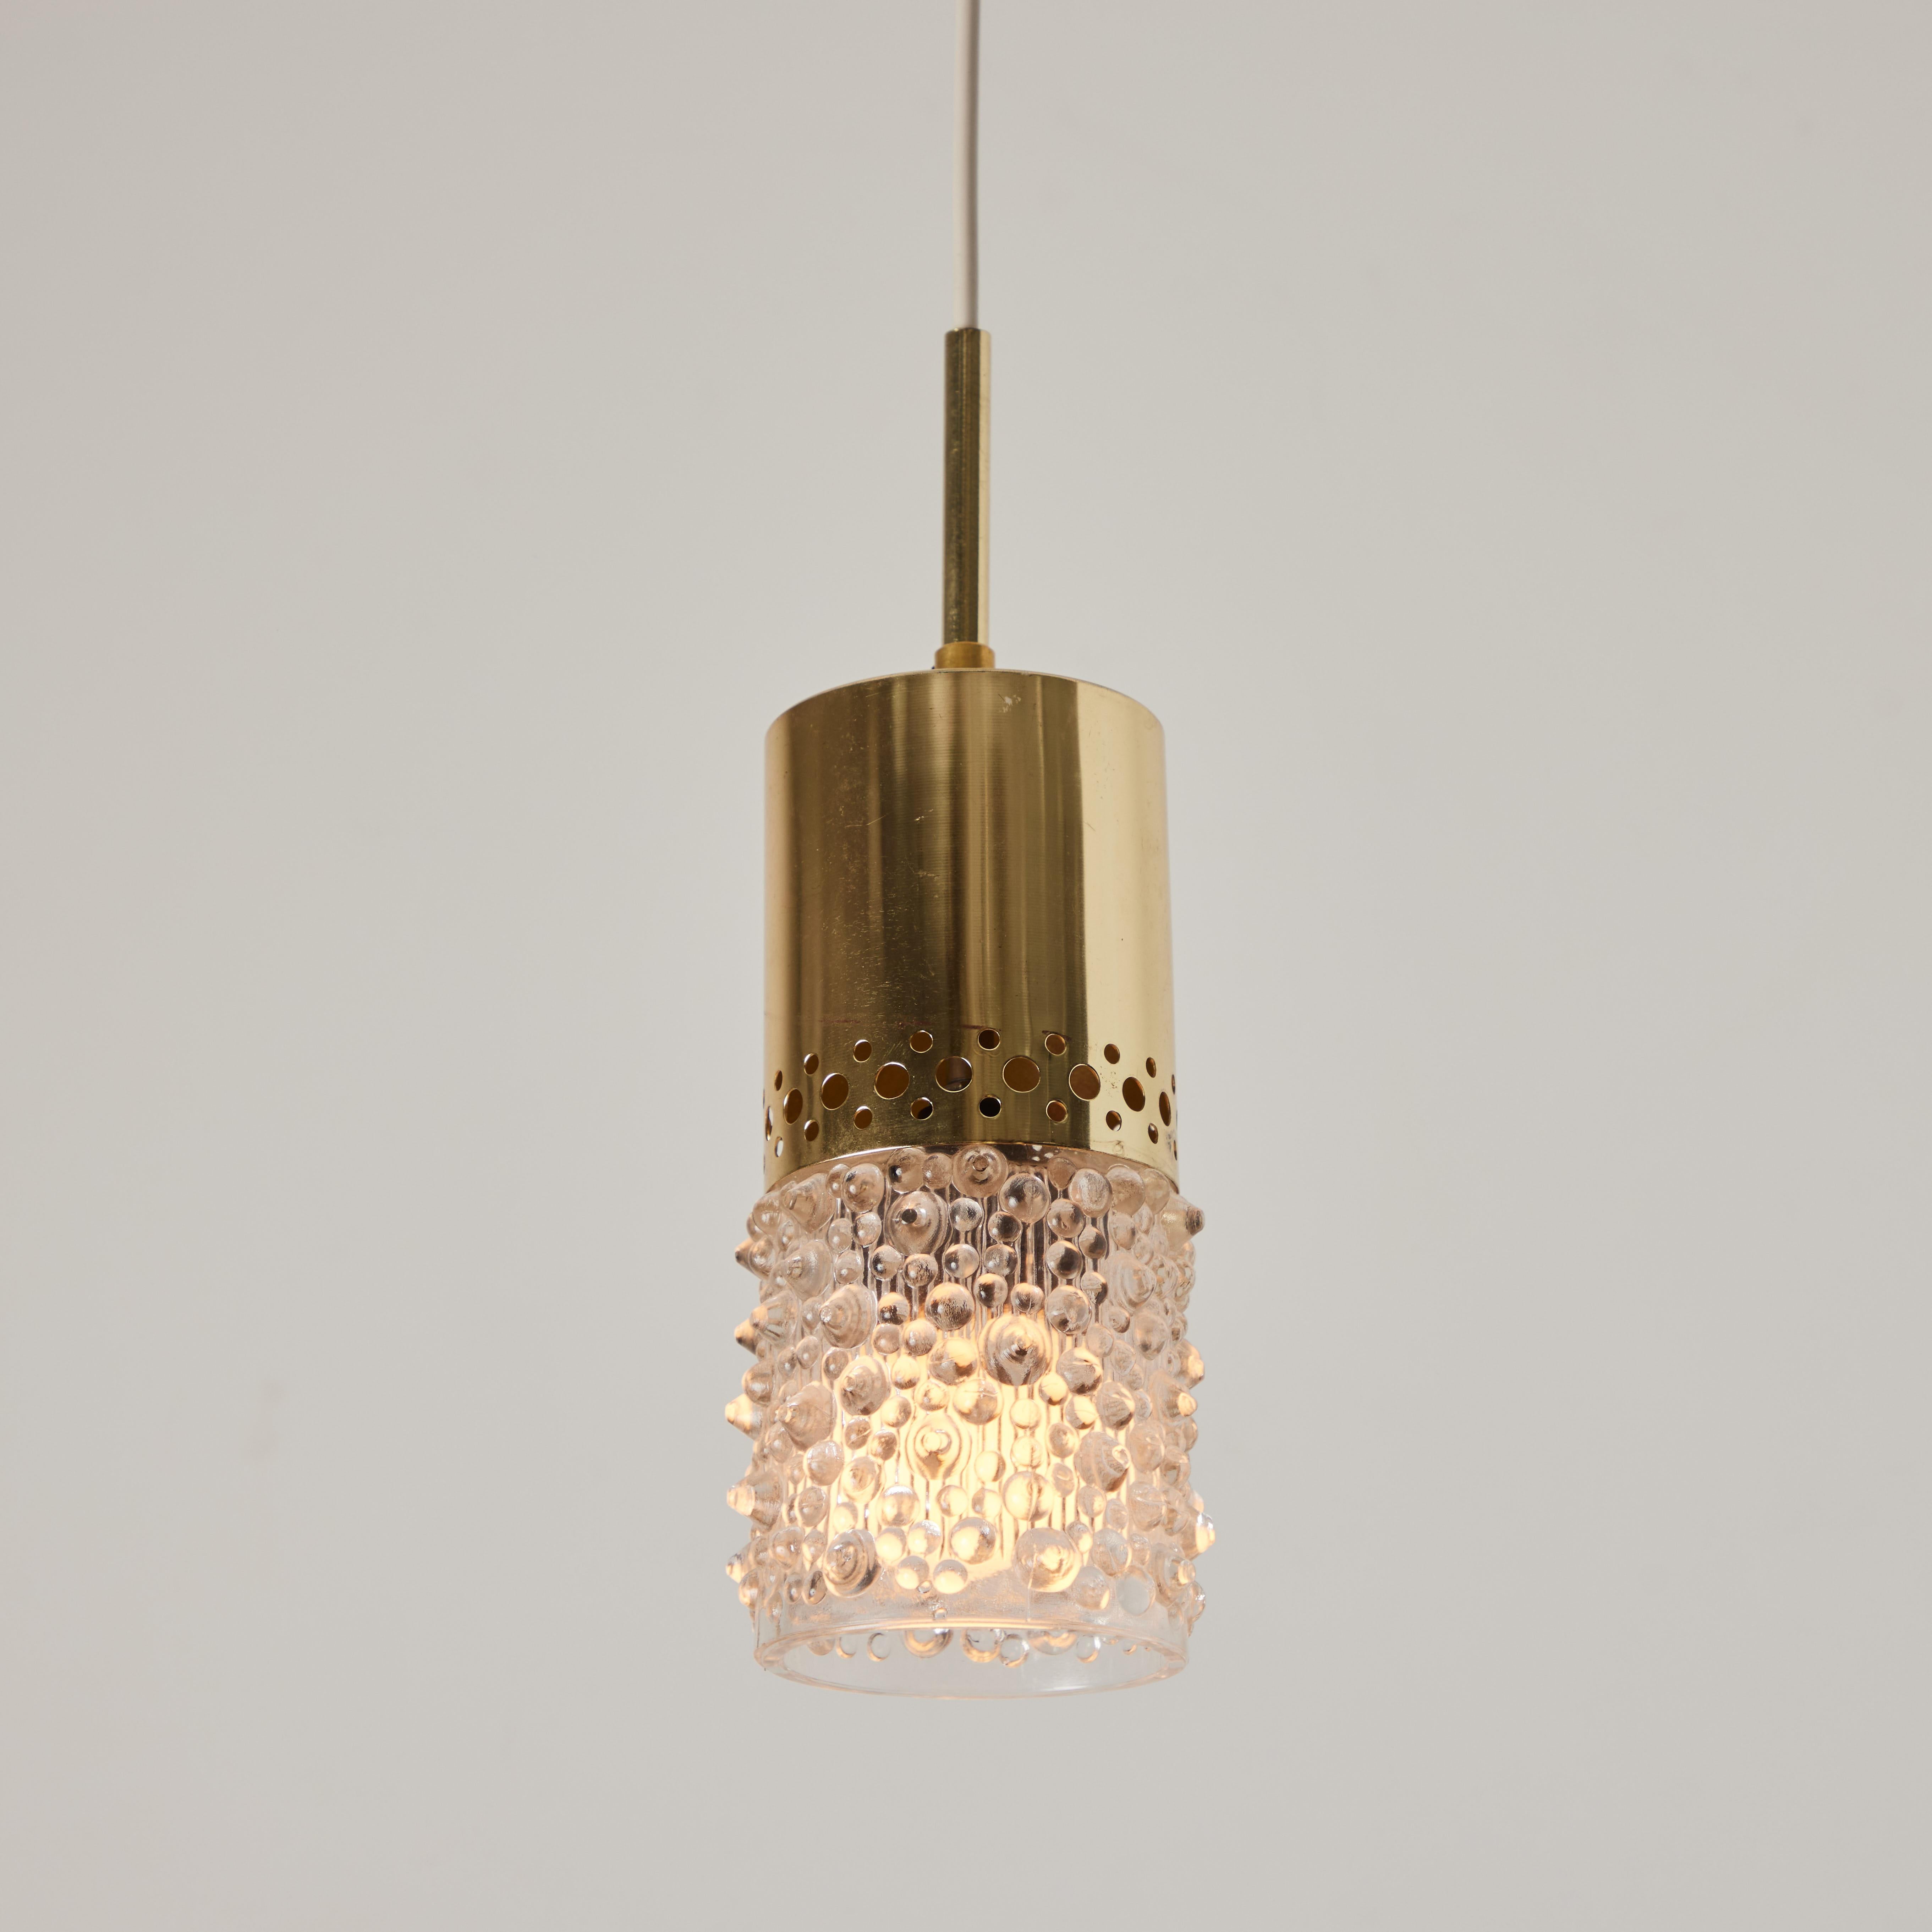 Pair of 1960s Brass and Bubble Glass Pendants by Helena Tynell.

Executed in thick and heavy sculpturally textured bubble glass with perforated polished brass mount and ceiling canopy. Fabricated in Limburg, Germany circa 1960s. Unmarked.

Helena